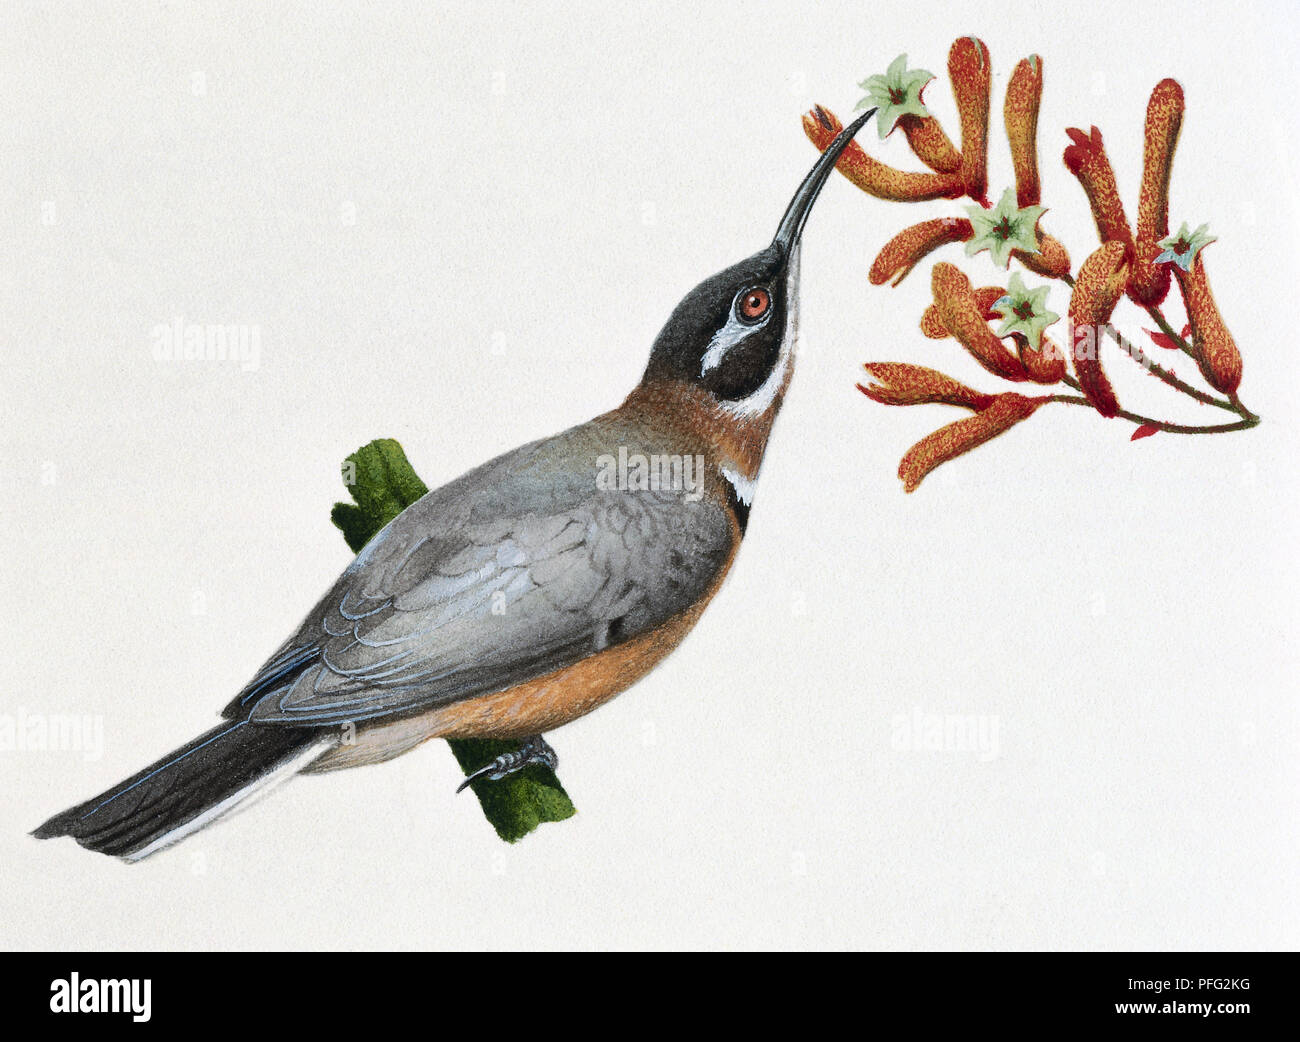 A grey bird with an orange belly eating nectar from a plant Stock Photo